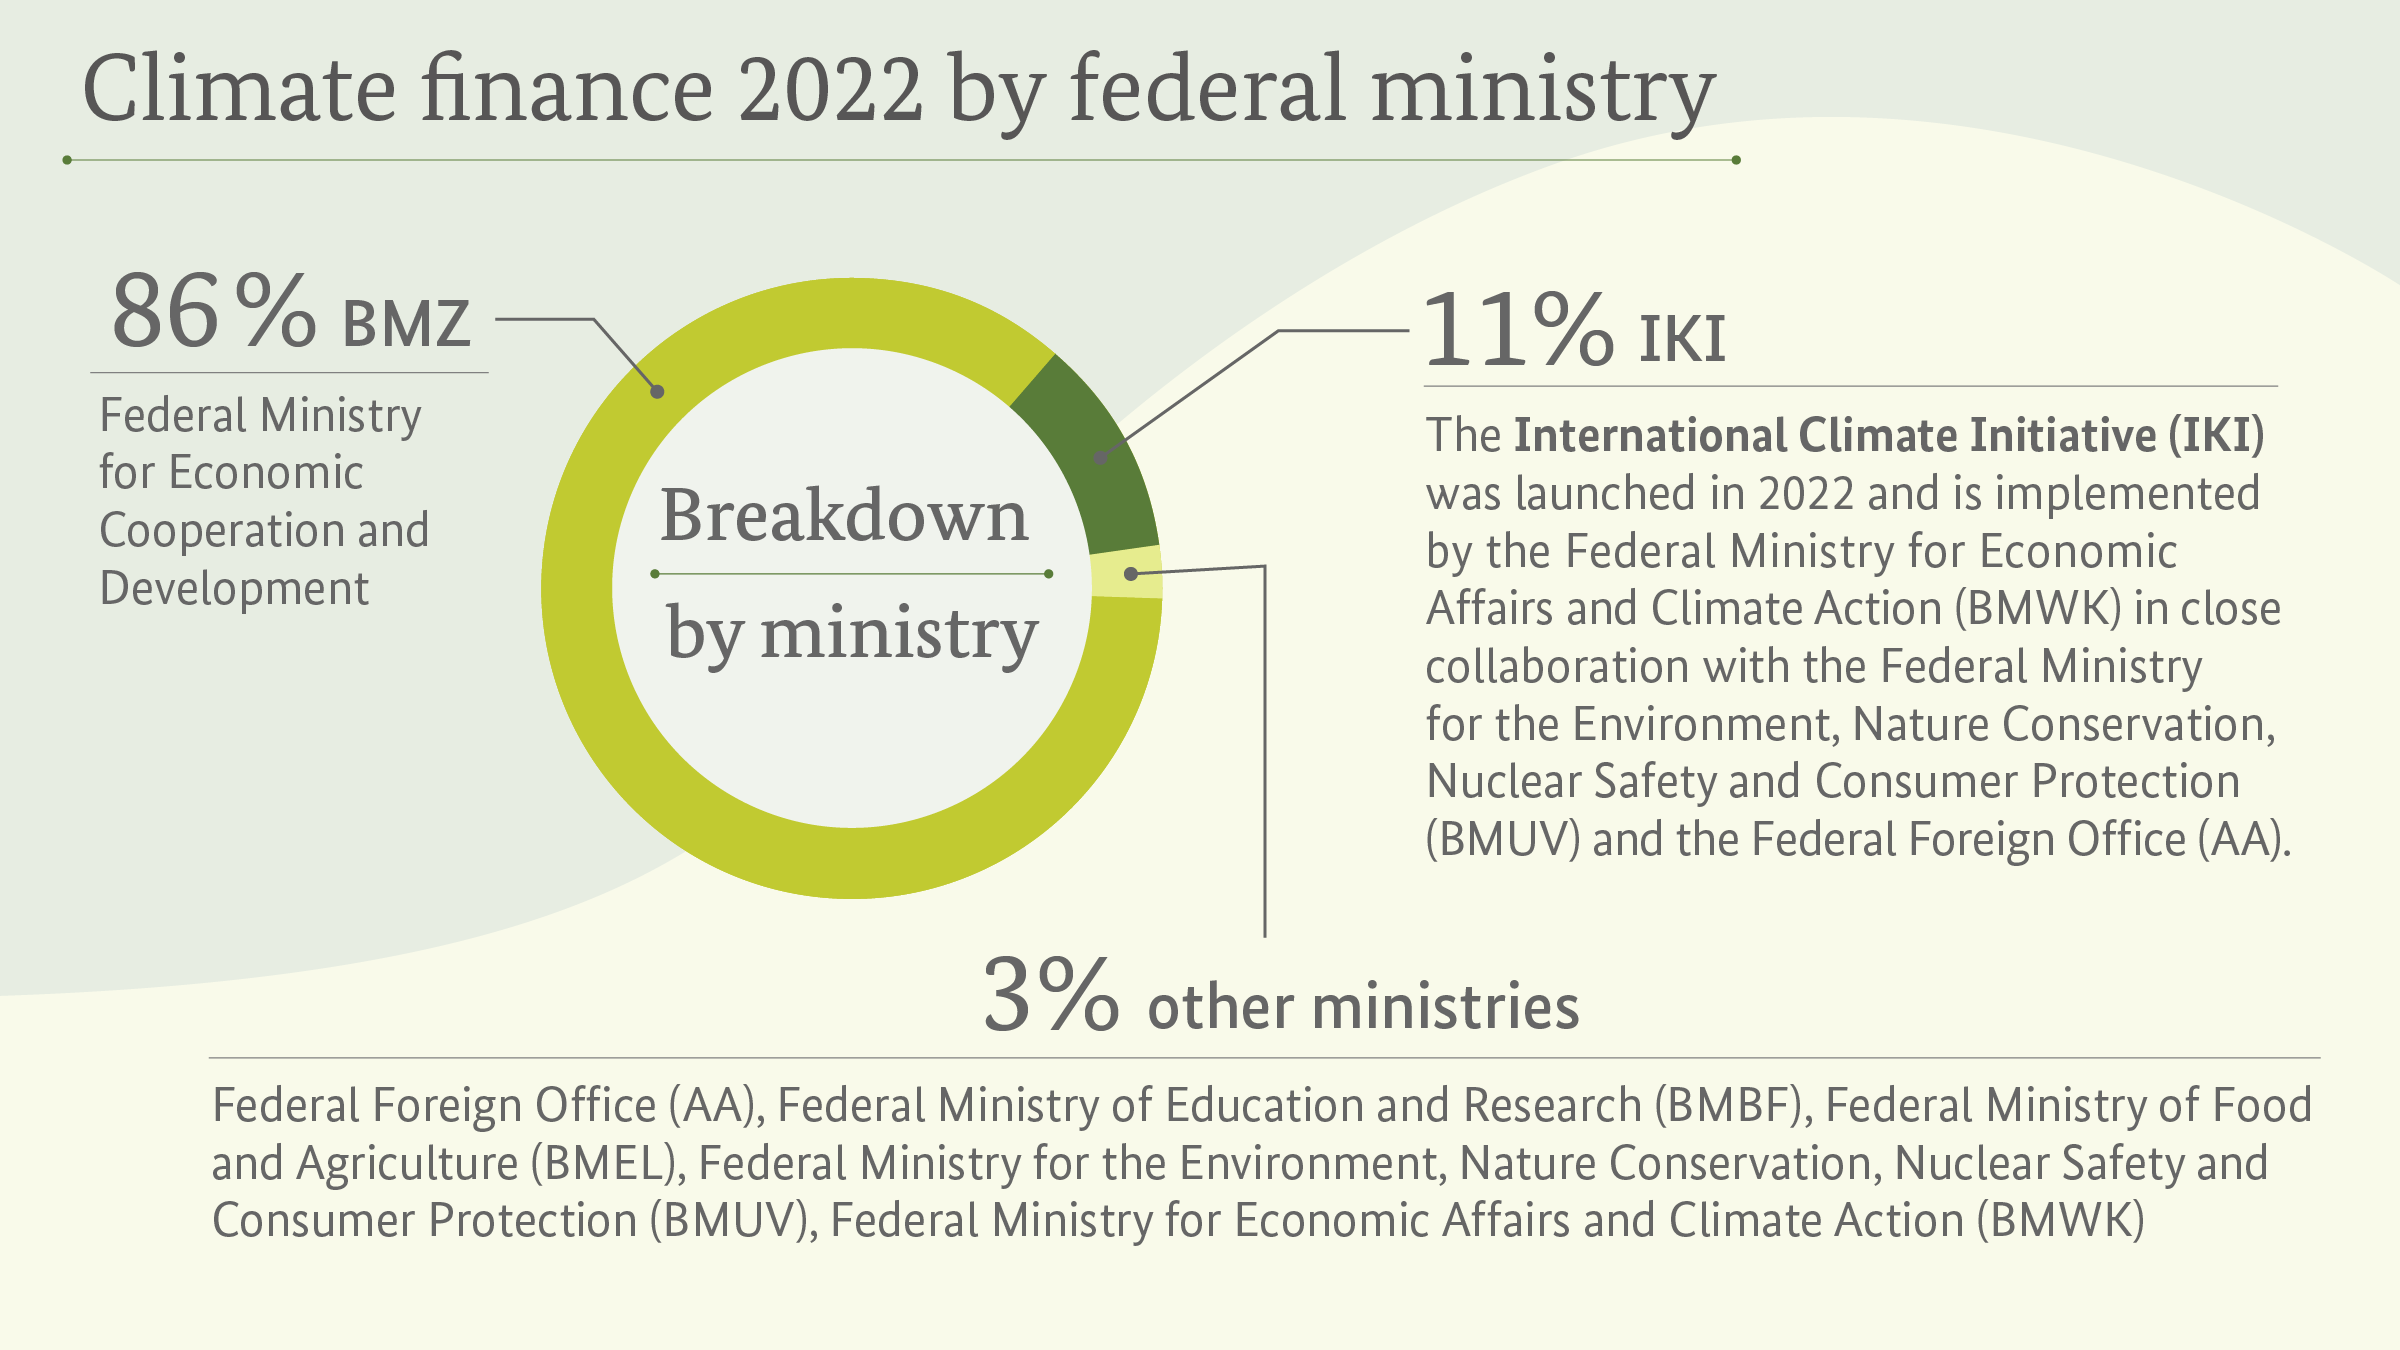 Climate finance 2022 by federal ministry: On average, more than 85 per cent of Germany's annual funding for climate finance comes from the BMZ's budget. In addition, the German government supports extensive climate action through its International Climate Initiative (IKI).